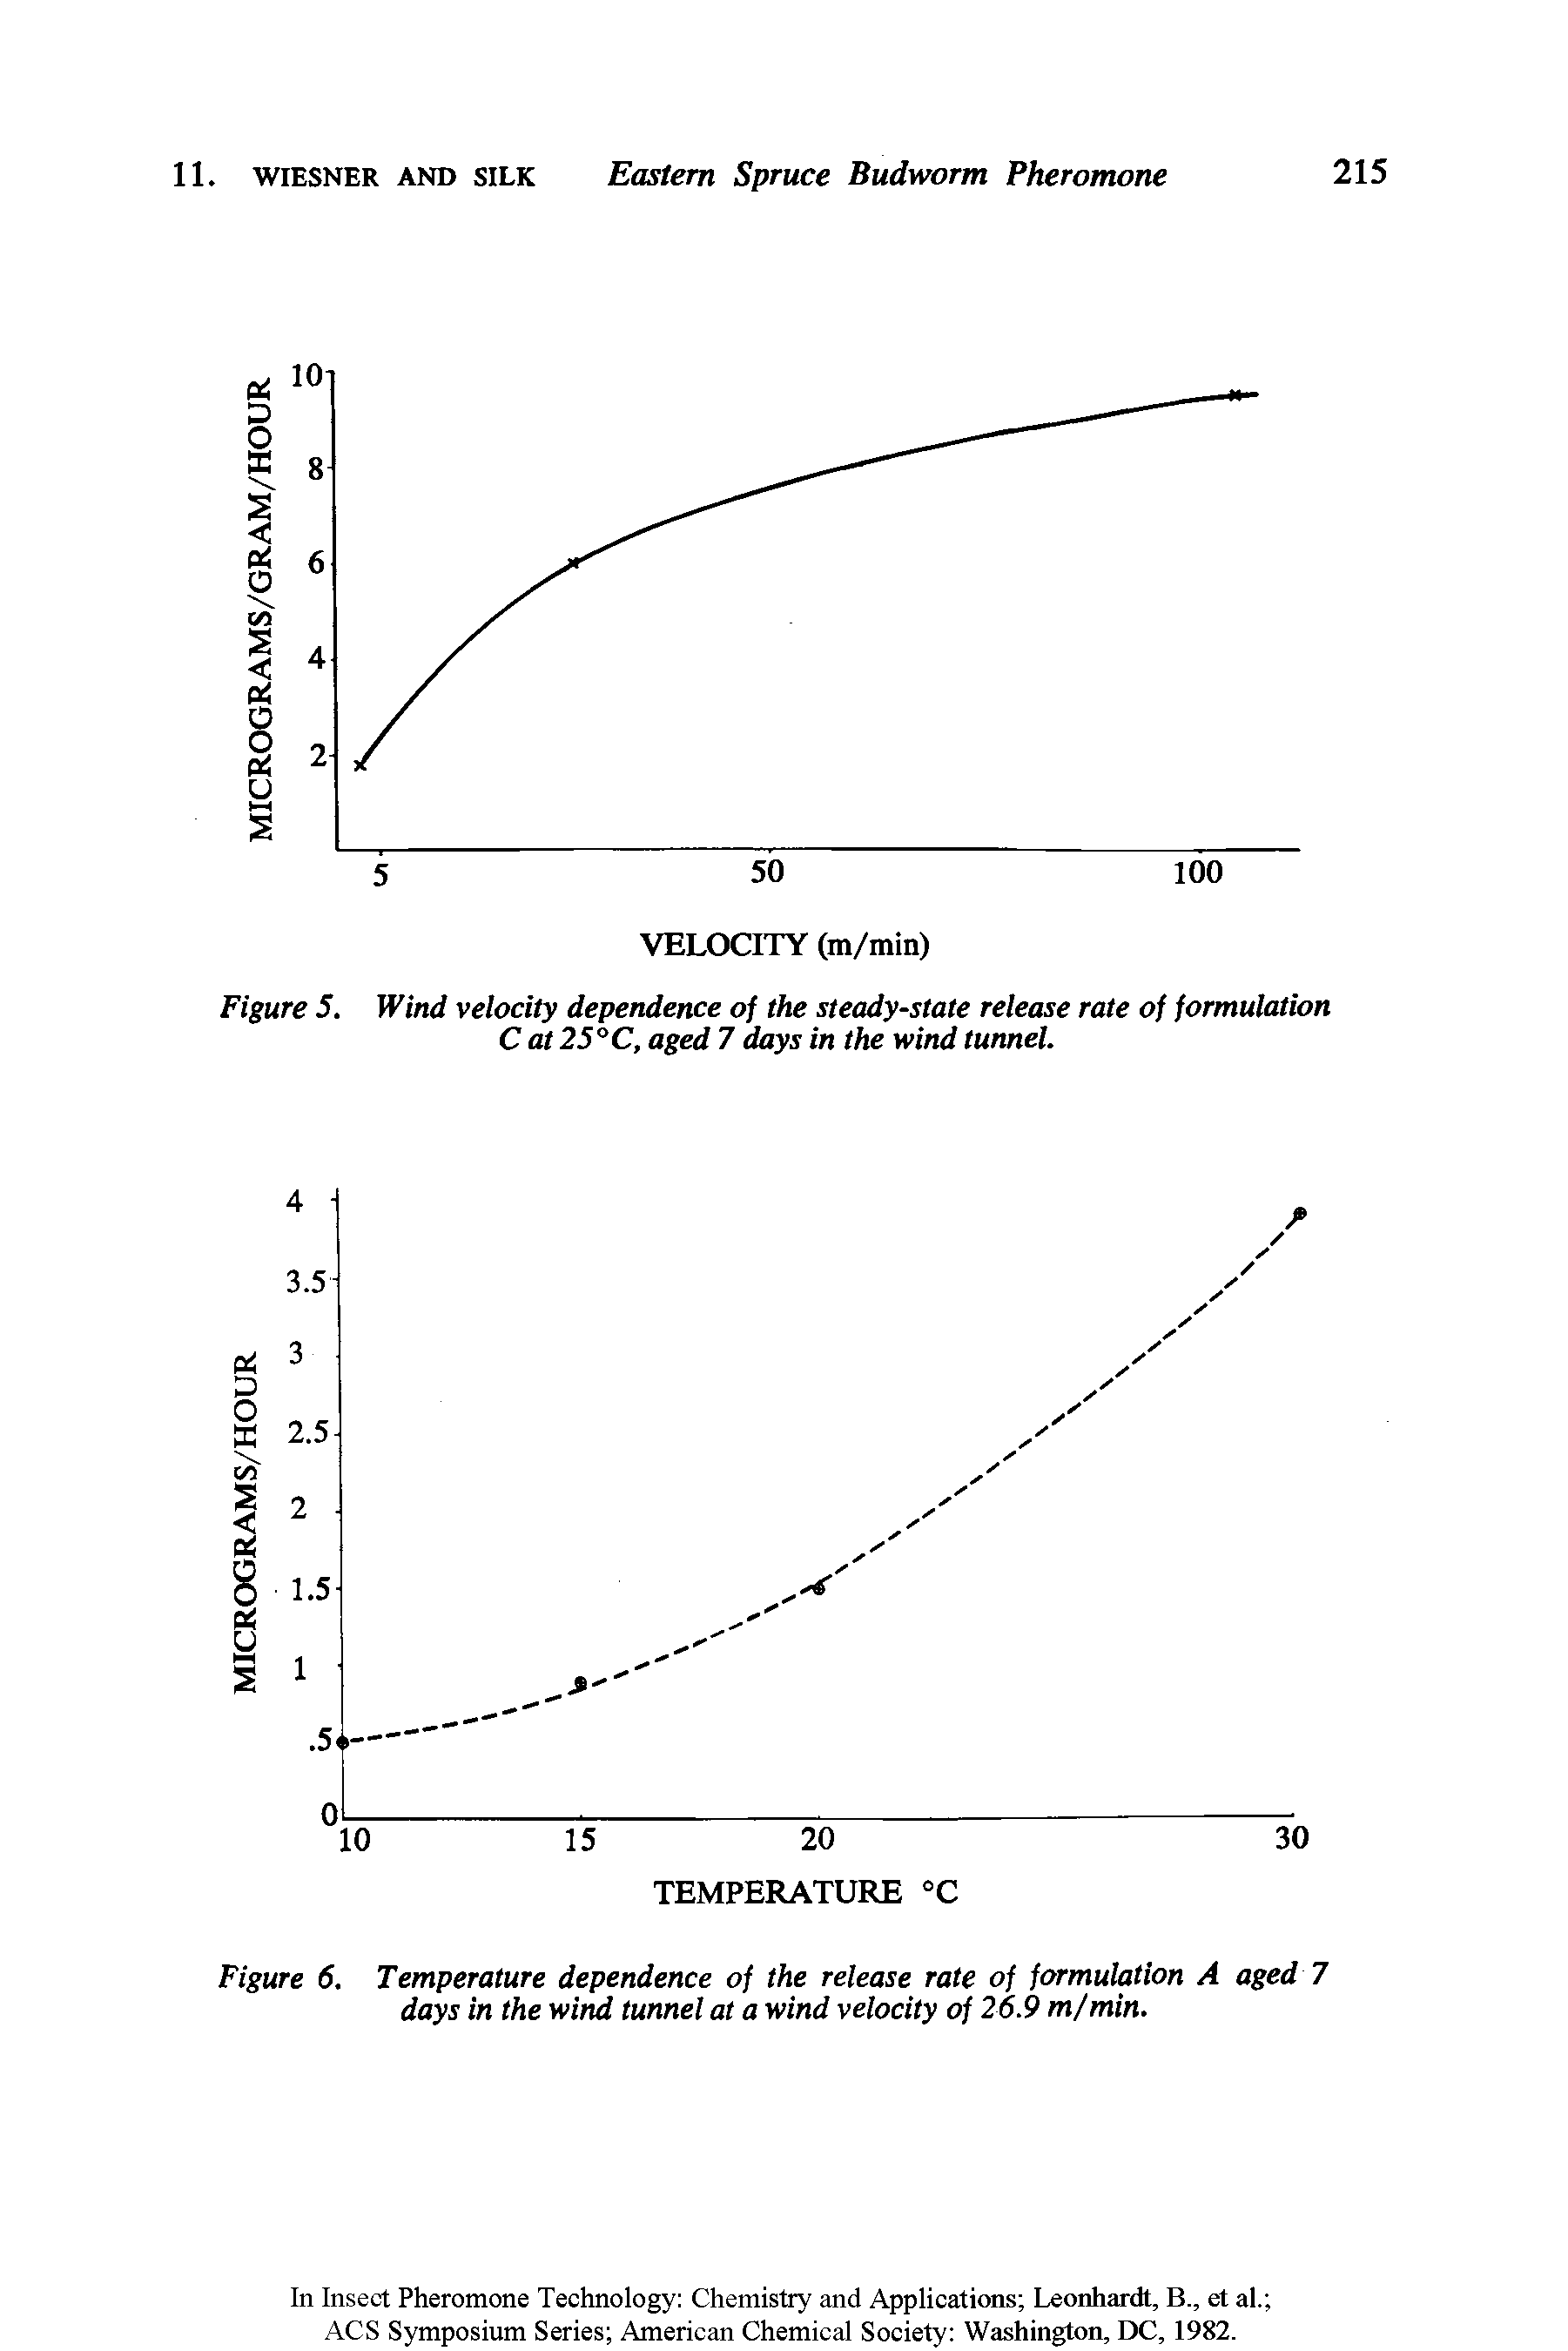 Figure 6. Temperature dependence of the release rate of formulation A aged 7 days in the wind tunnel at a wind velocity of 26.9 m/min.